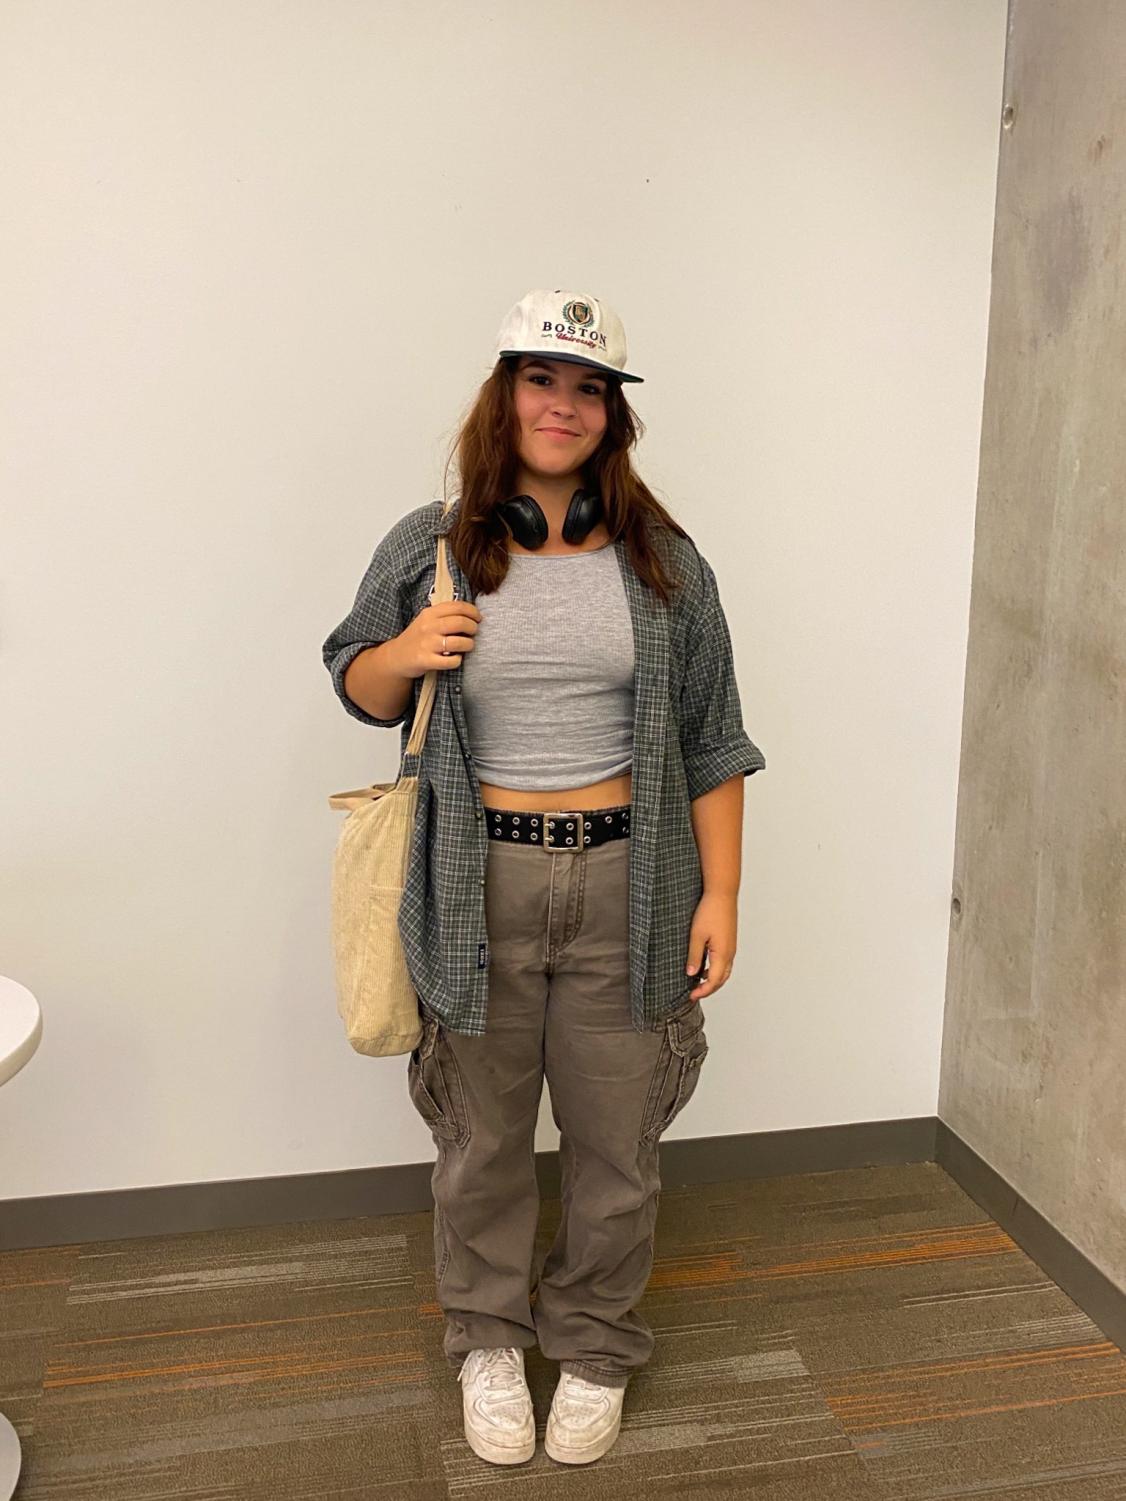 A Suffolk student shows off her fall fit